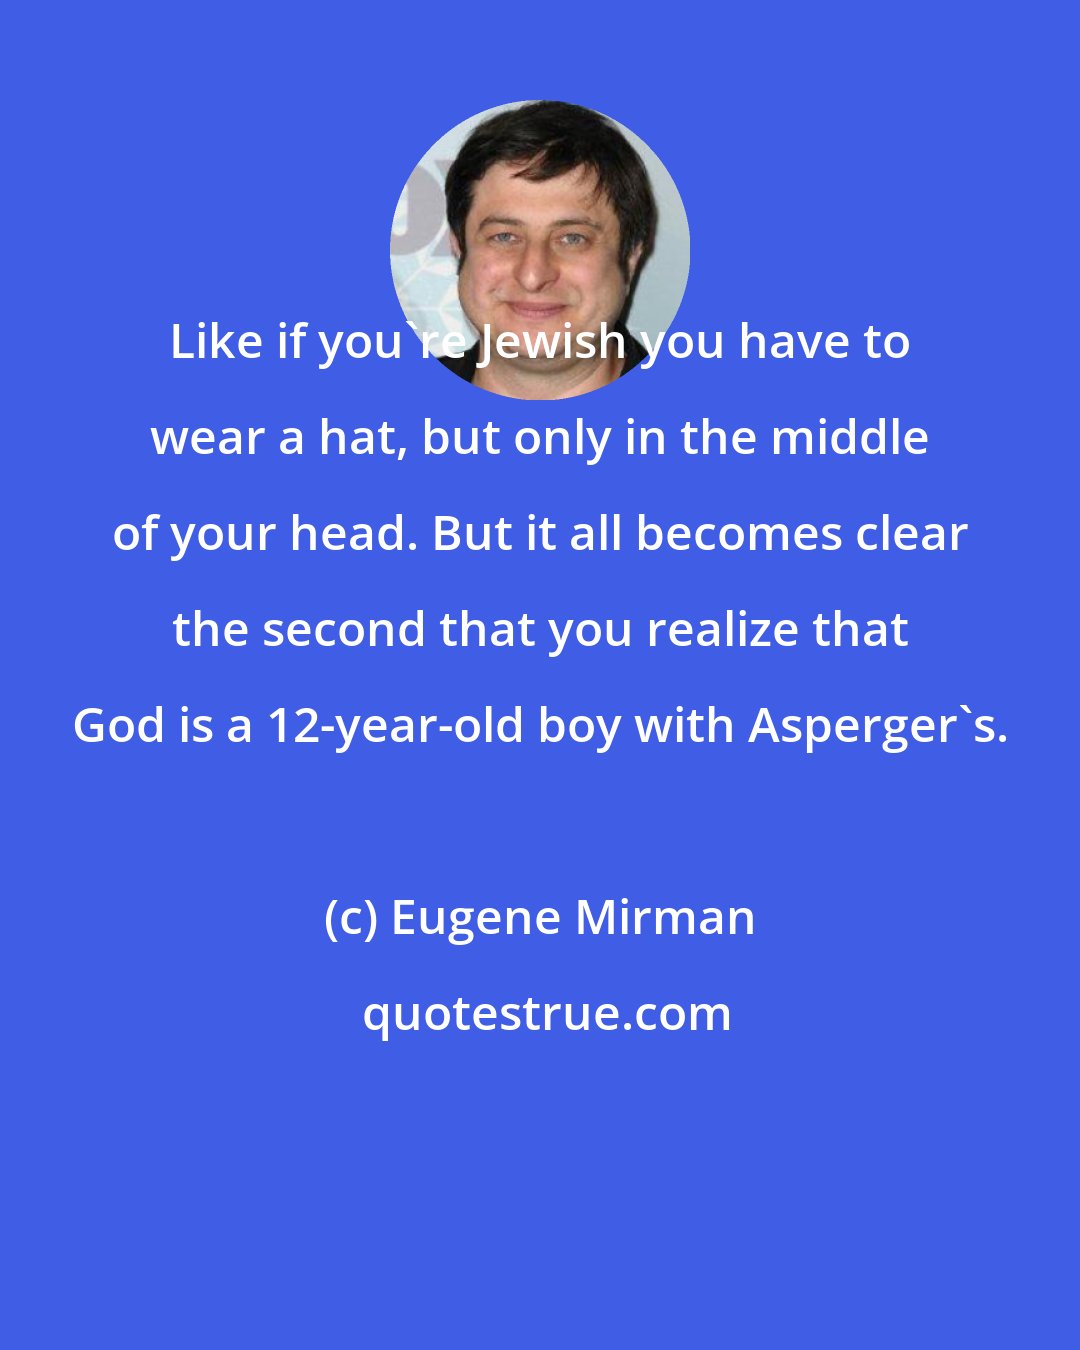 Eugene Mirman: Like if you're Jewish you have to wear a hat, but only in the middle of your head. But it all becomes clear the second that you realize that God is a 12-year-old boy with Asperger's.